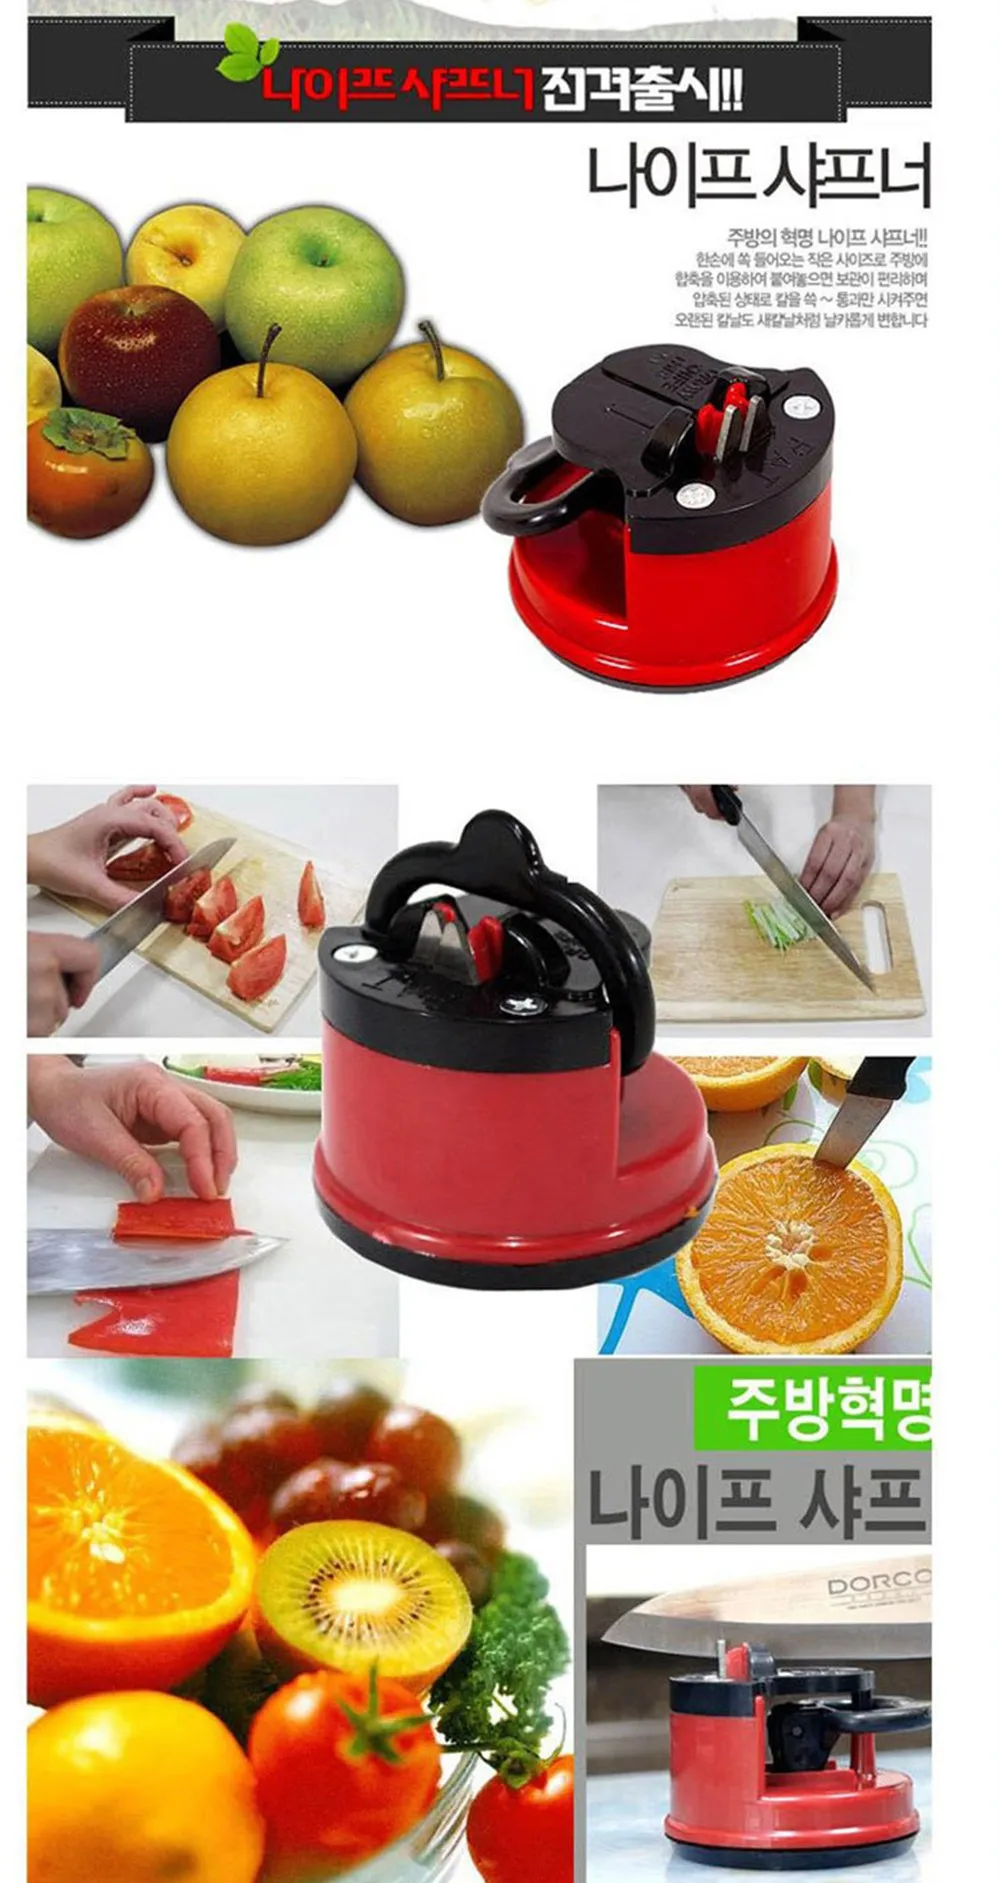 Professional-Pull-Through-Manual-Knife-Sharpener-For-Corner-Lansky-Points-Than-Grinder-Secure-Suction-Chef-Pad-Kitchen-Sharpening-Tool-KC1021 (7)